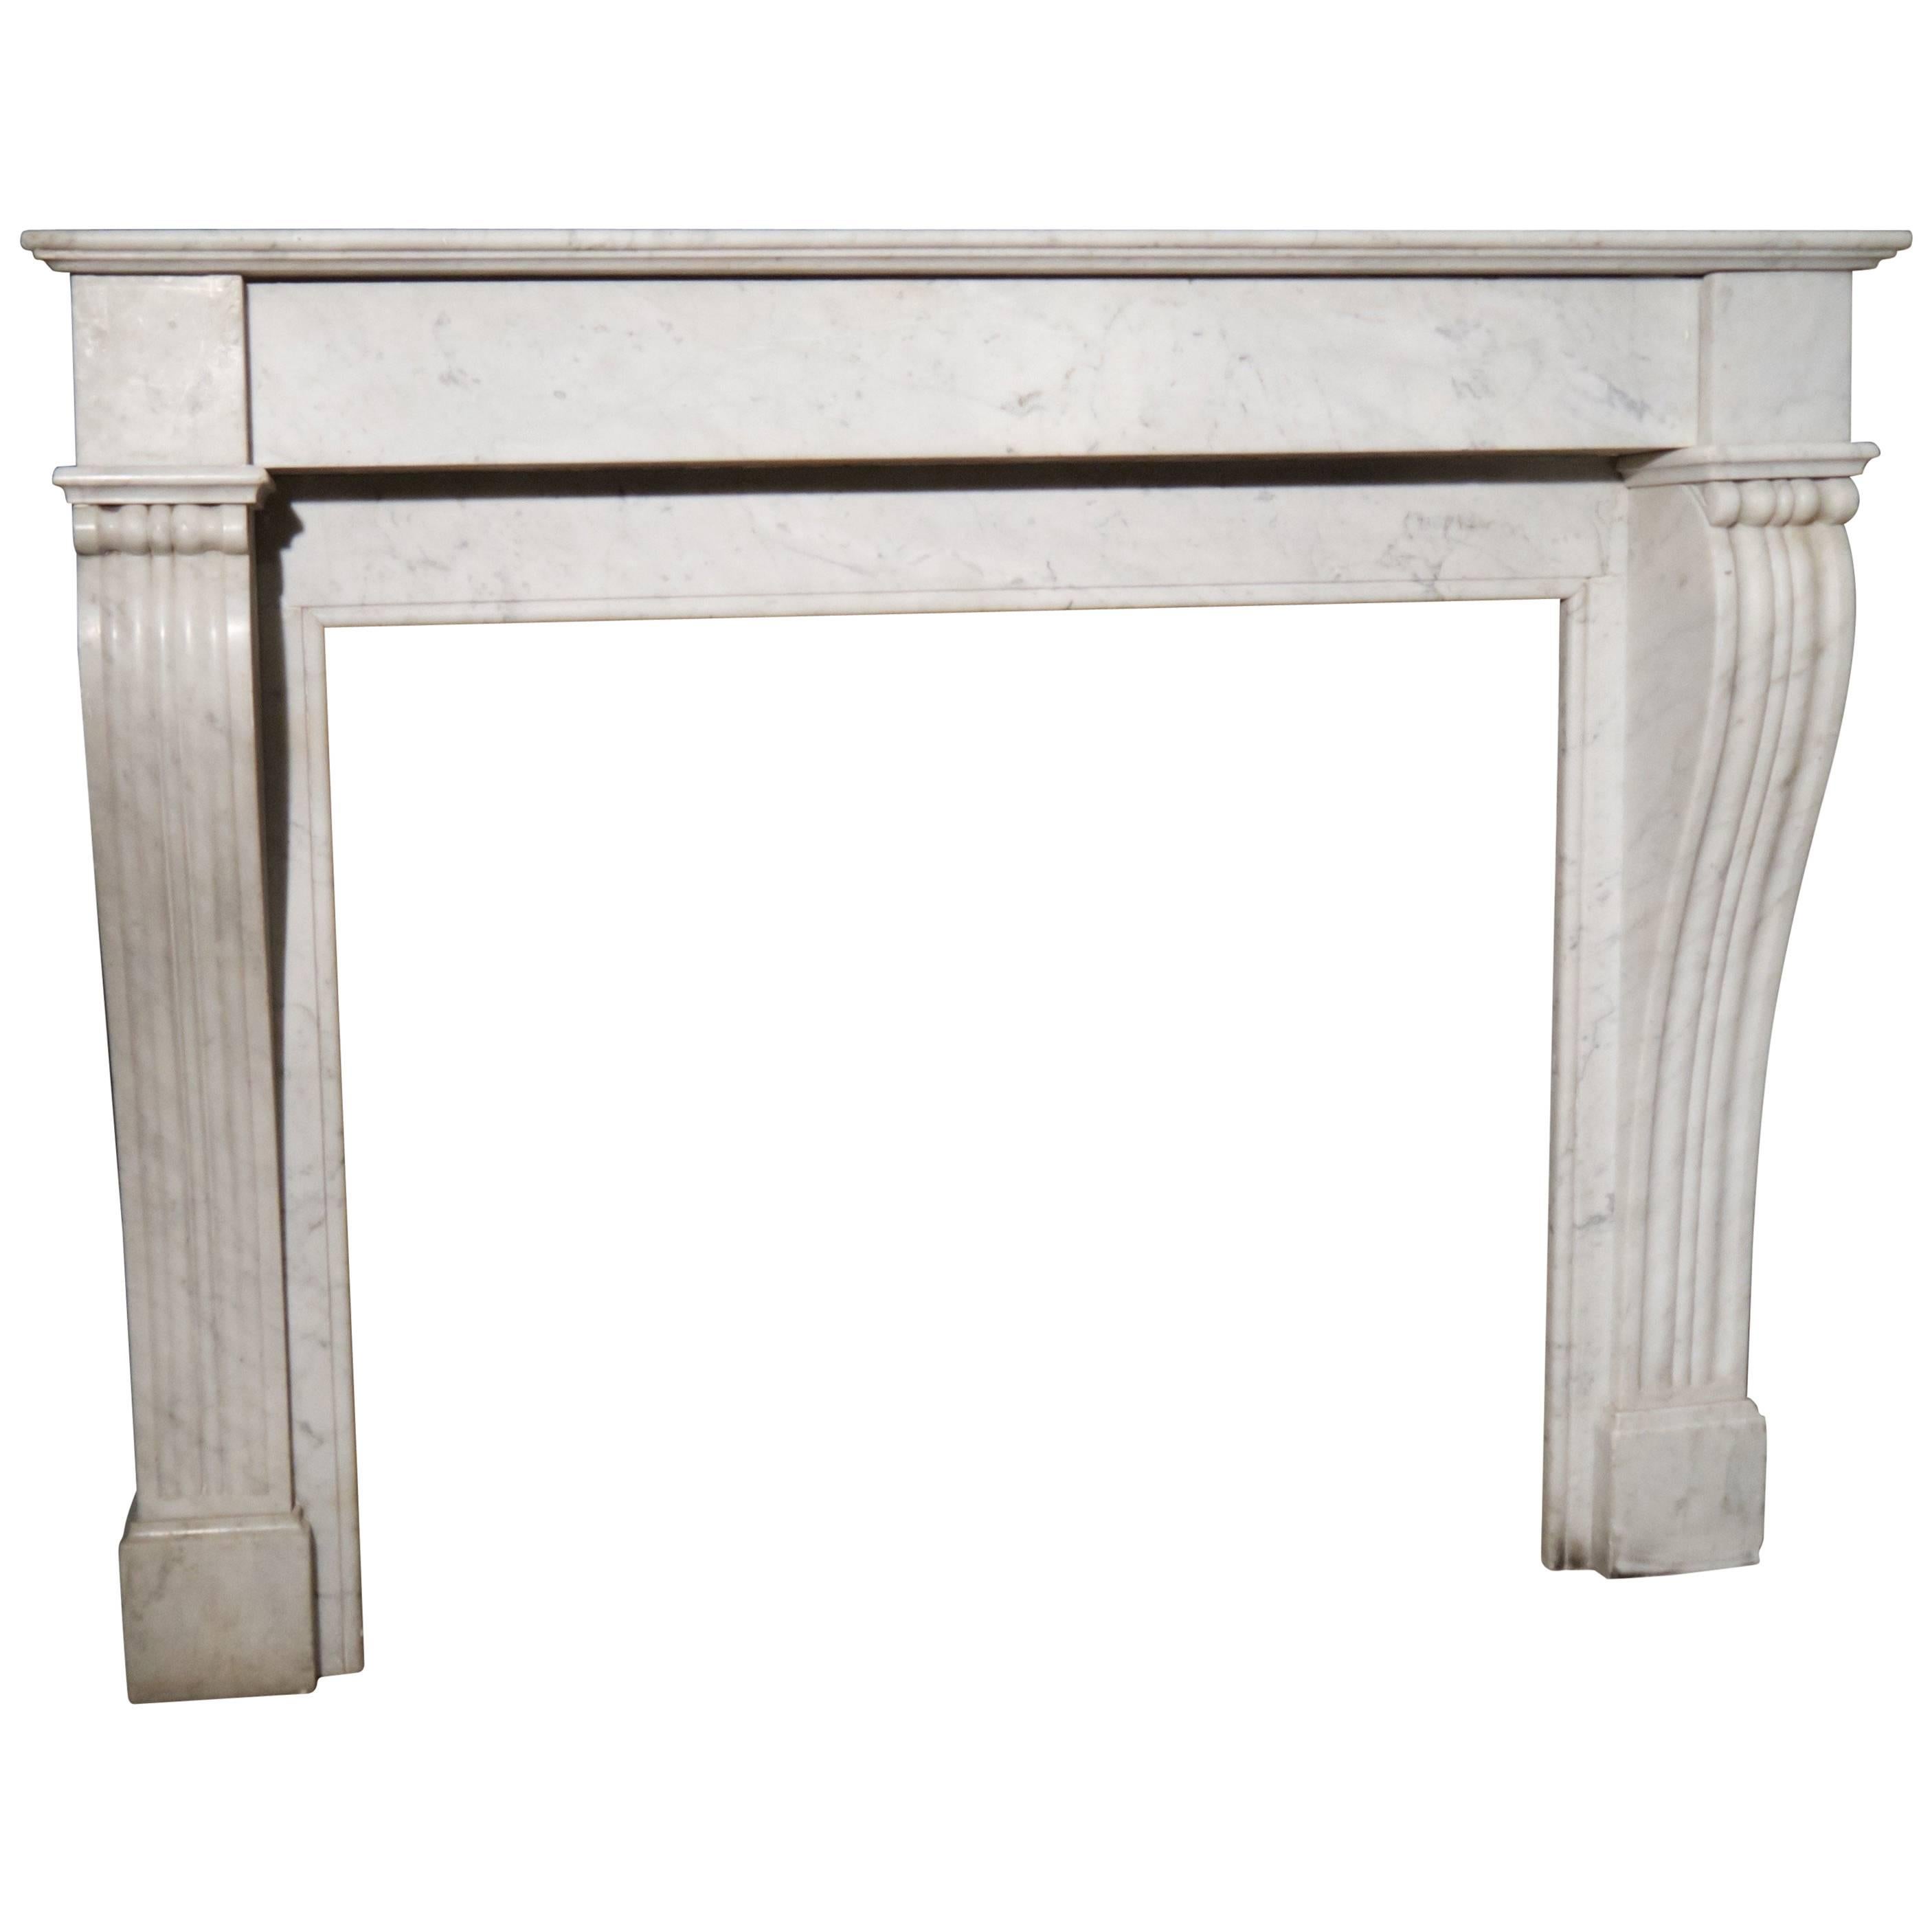 19th Century antique Louis Xv1 Style Marble fireplace